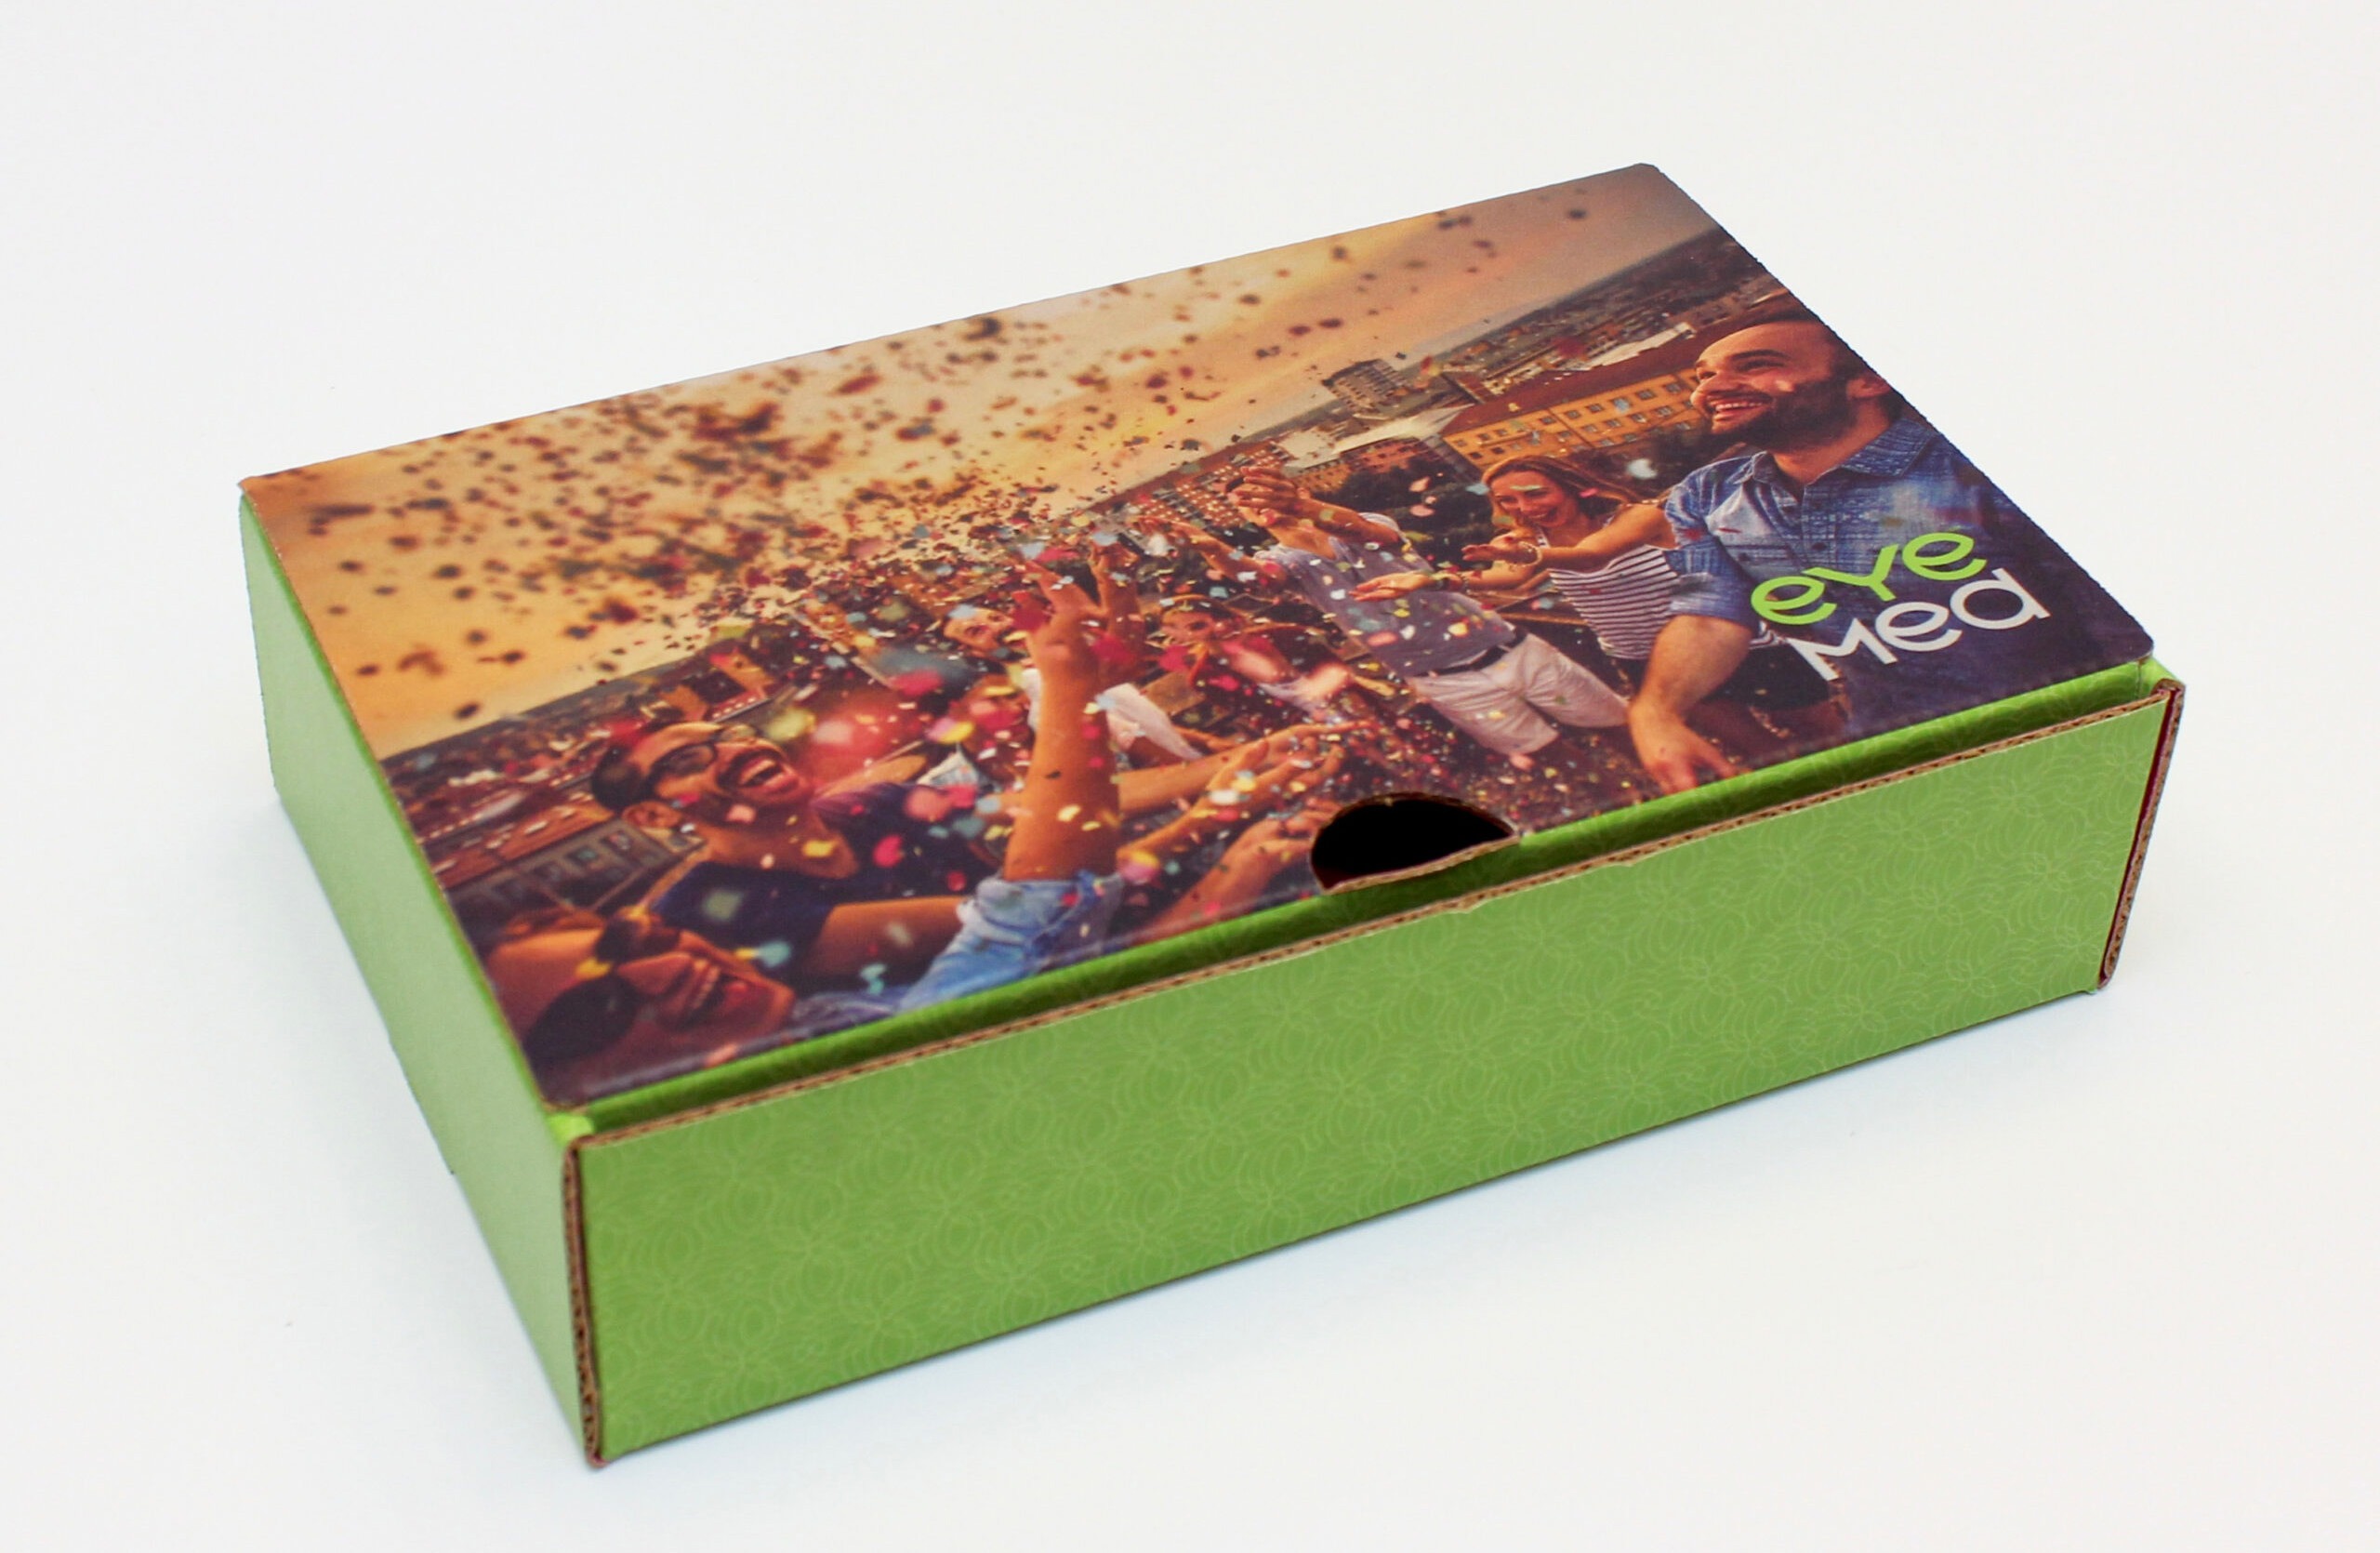 Outside of the Appreciation Box that was provided to their Clients - portfolio packaging